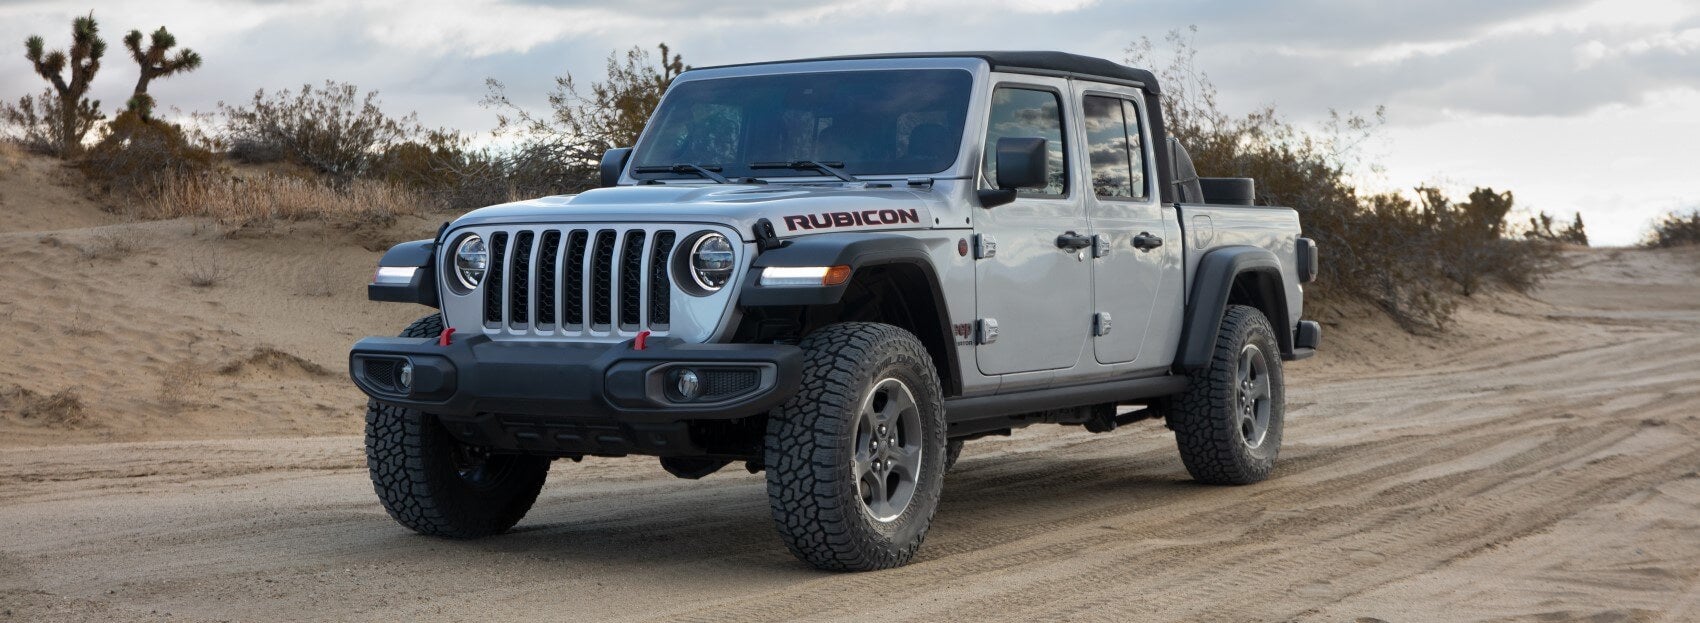 2021 Jeep Gladiator Rubicon Review